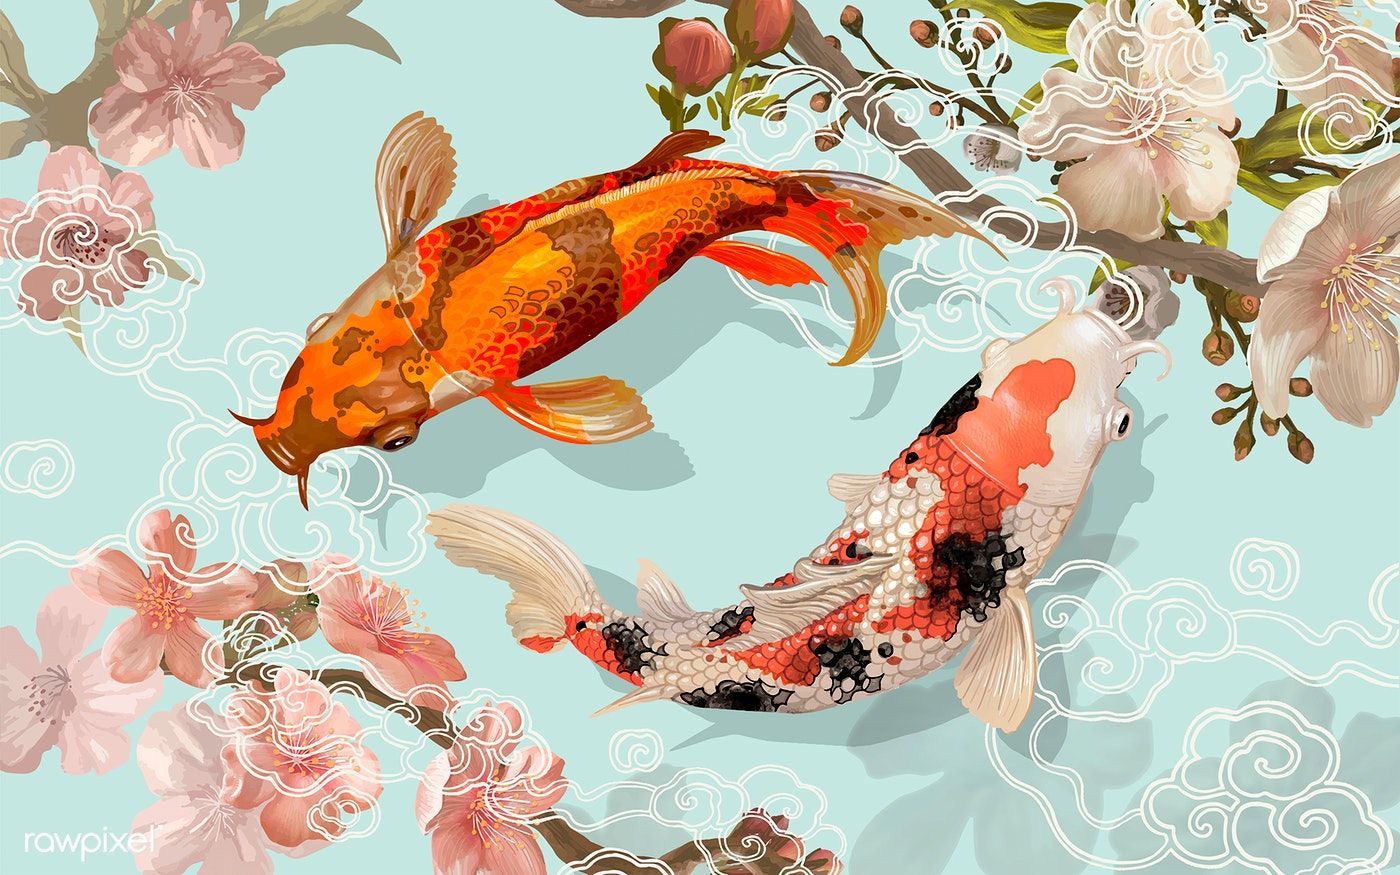 A couple of koi fish swimming in the water - Koi fish